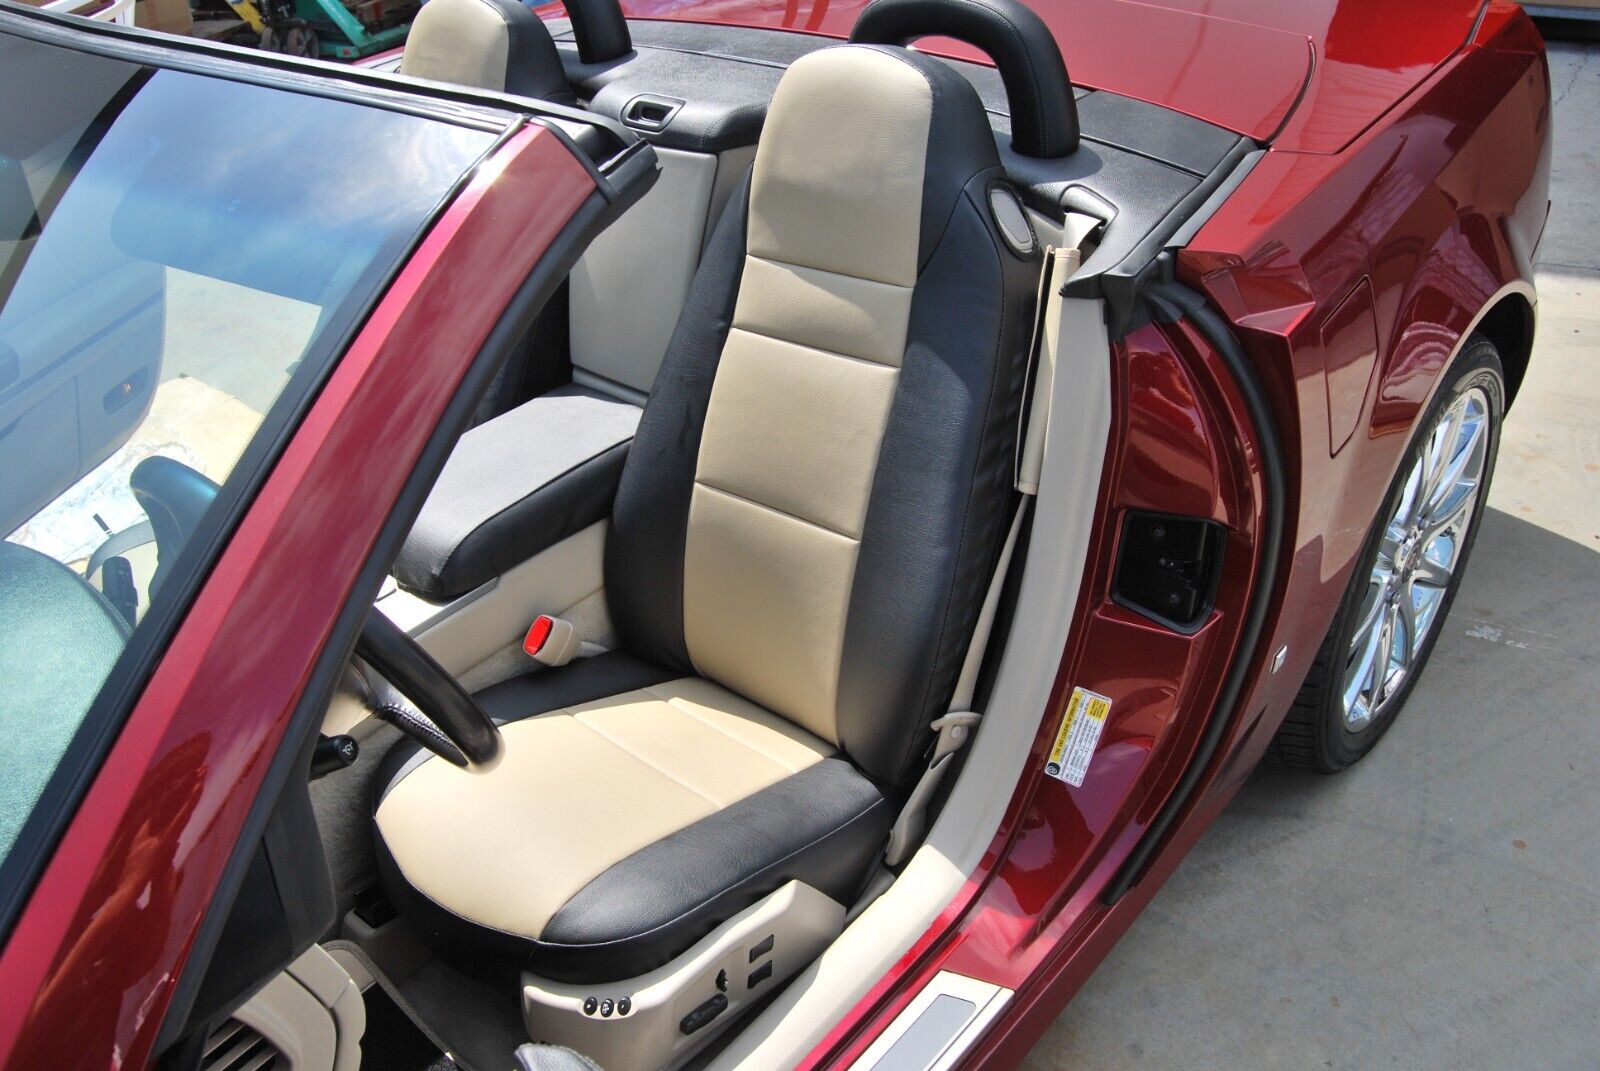 FOR CADILLAC XLR XLR-V IGGEE S.LEATHER CUSTOM FIT 2 FRONT SEAT COVERS 13 COLORS